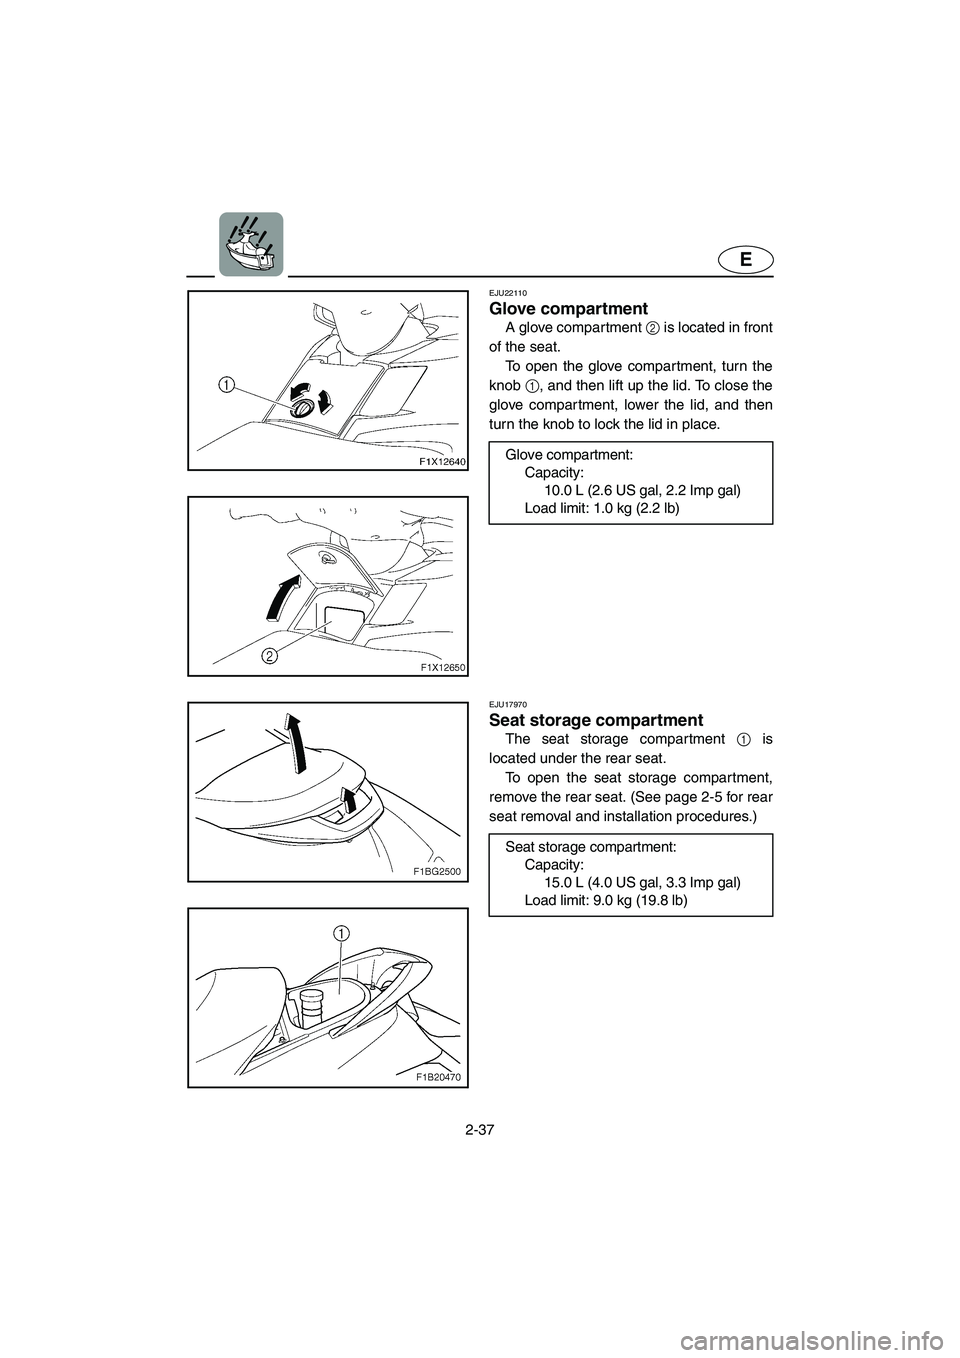 YAMAHA FX HO 2006 Repair Manual 2-37
E
EJU22110 
Glove compartment 
A glove compartment 2 is located in front
of the seat. 
To open the glove compartment, turn the
knob 1, and then lift up the lid. To close the
glove compartment, lo